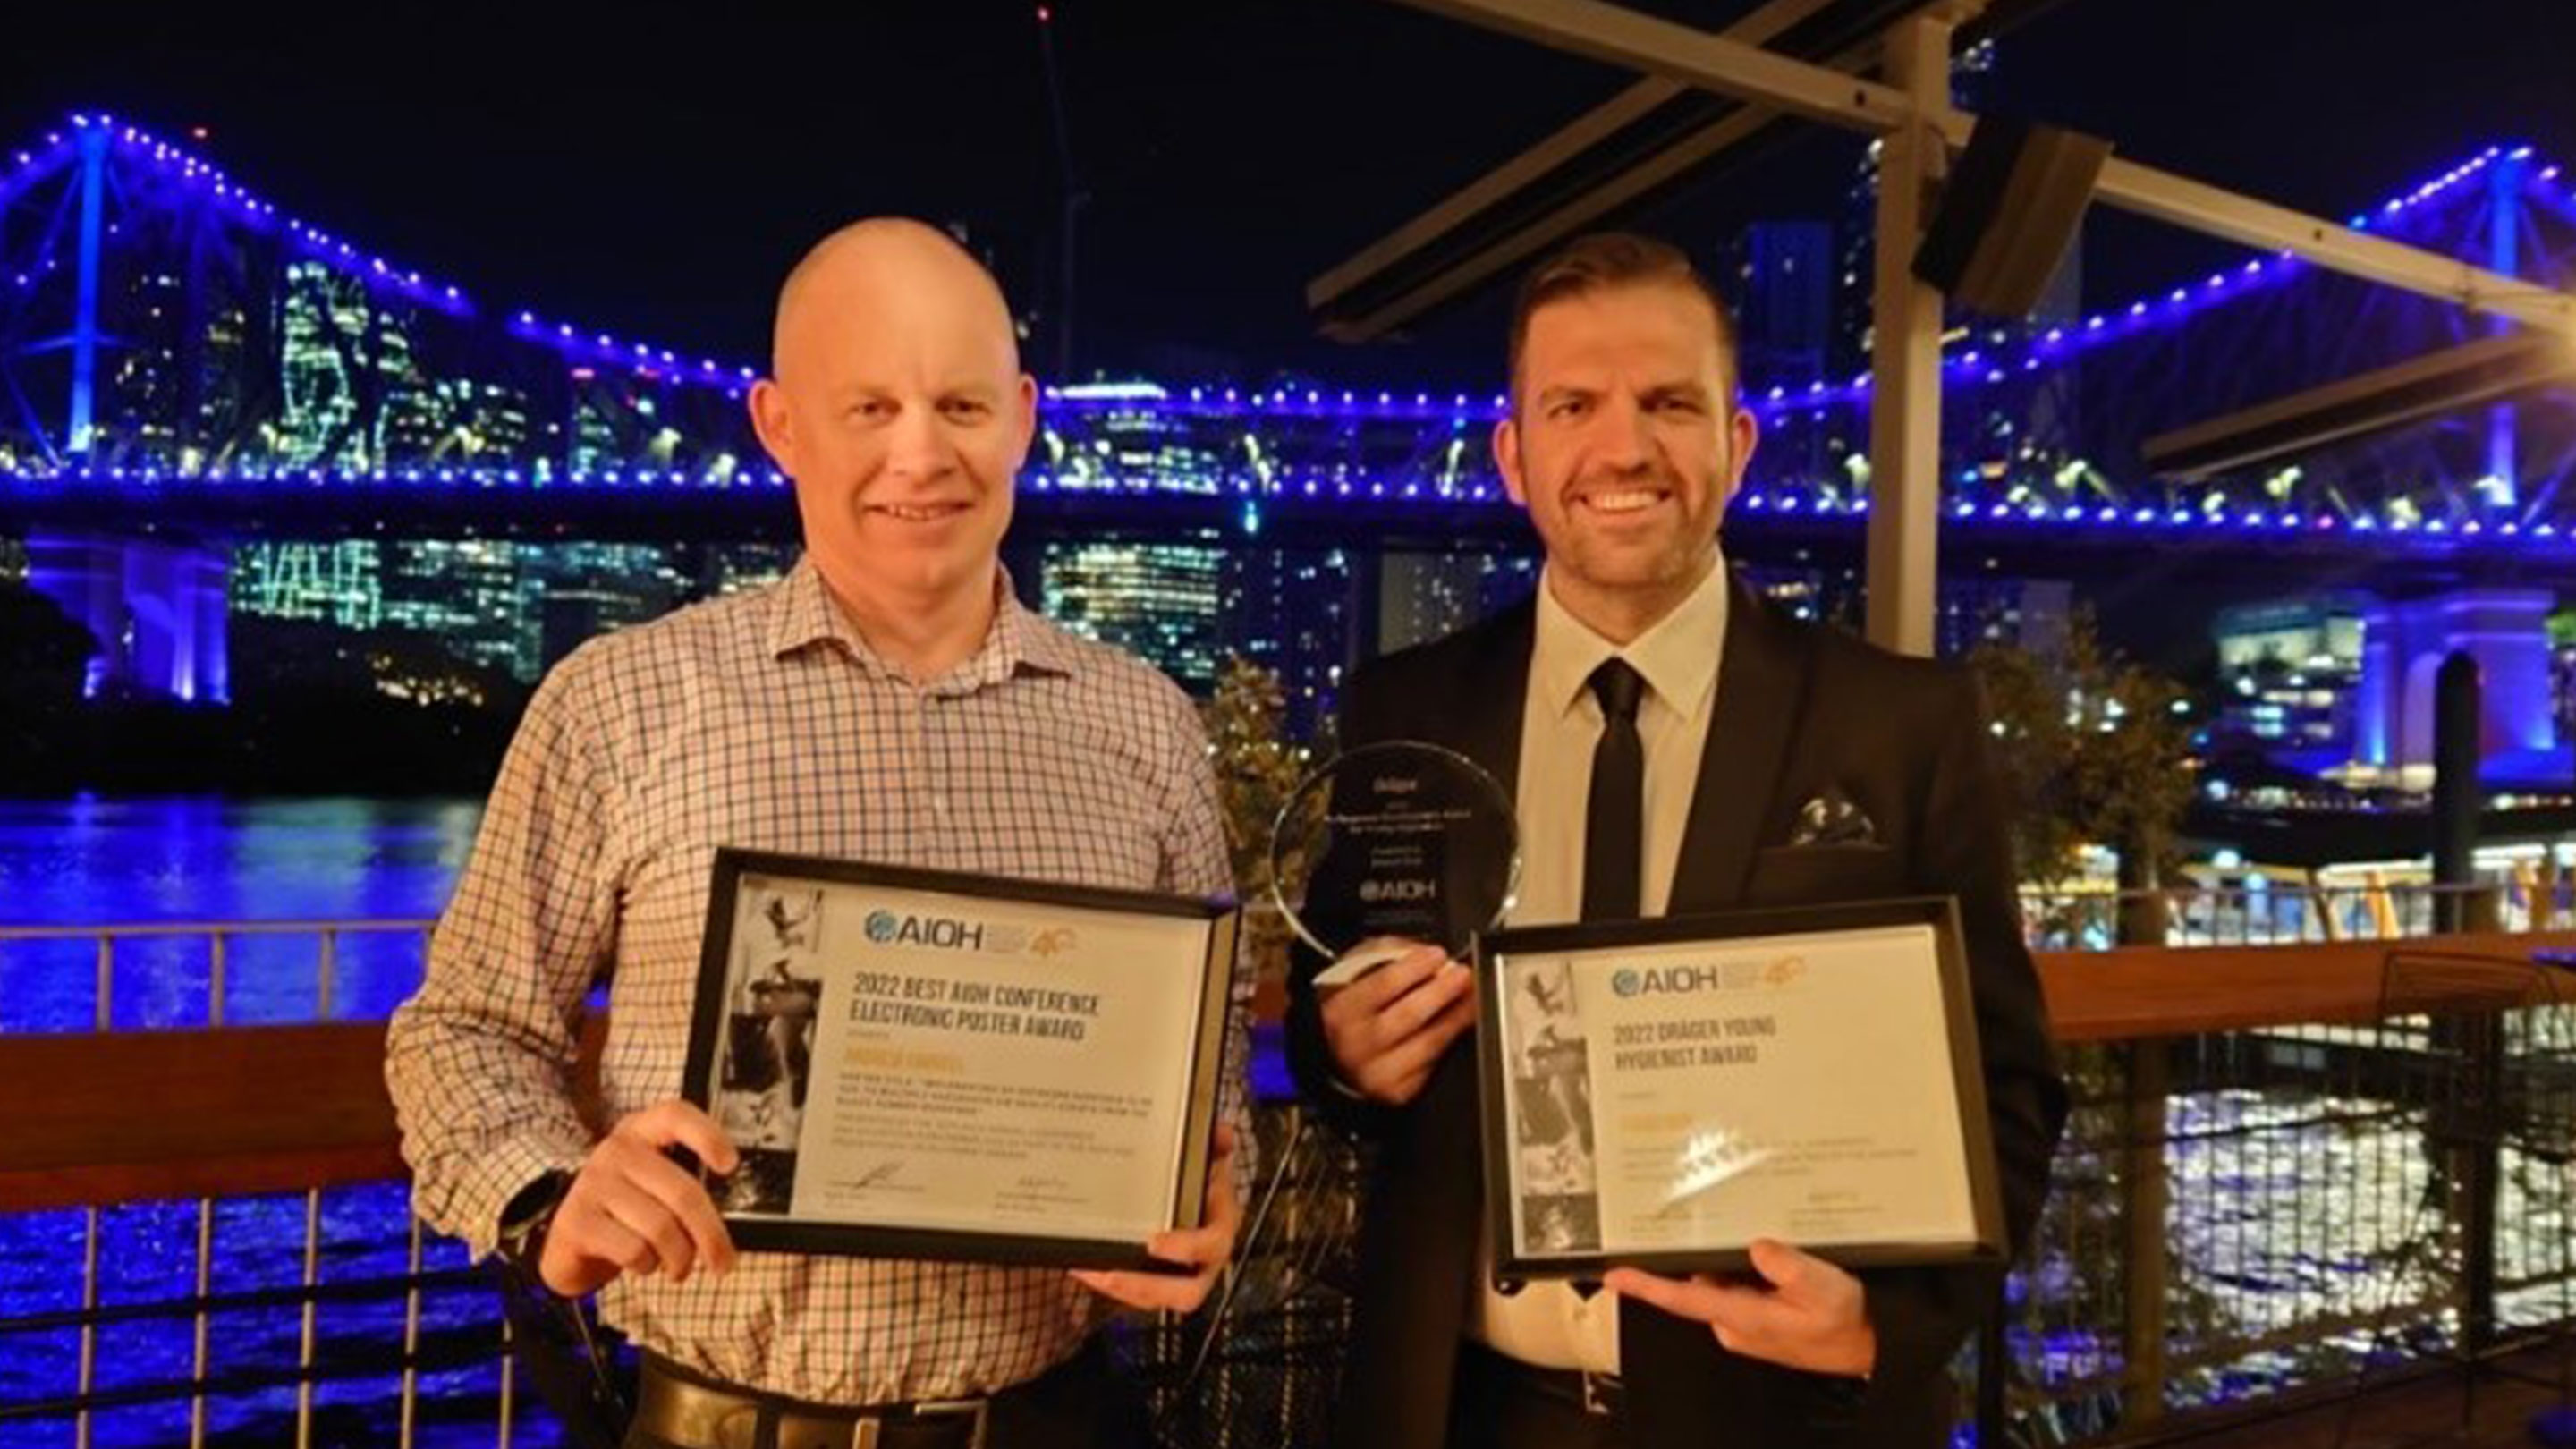 Image Industrial Hygienists Andrew Farrell and Fouad Rizk at the Australian Institute of Occupational Hygienists Conference in Brisbane last year.